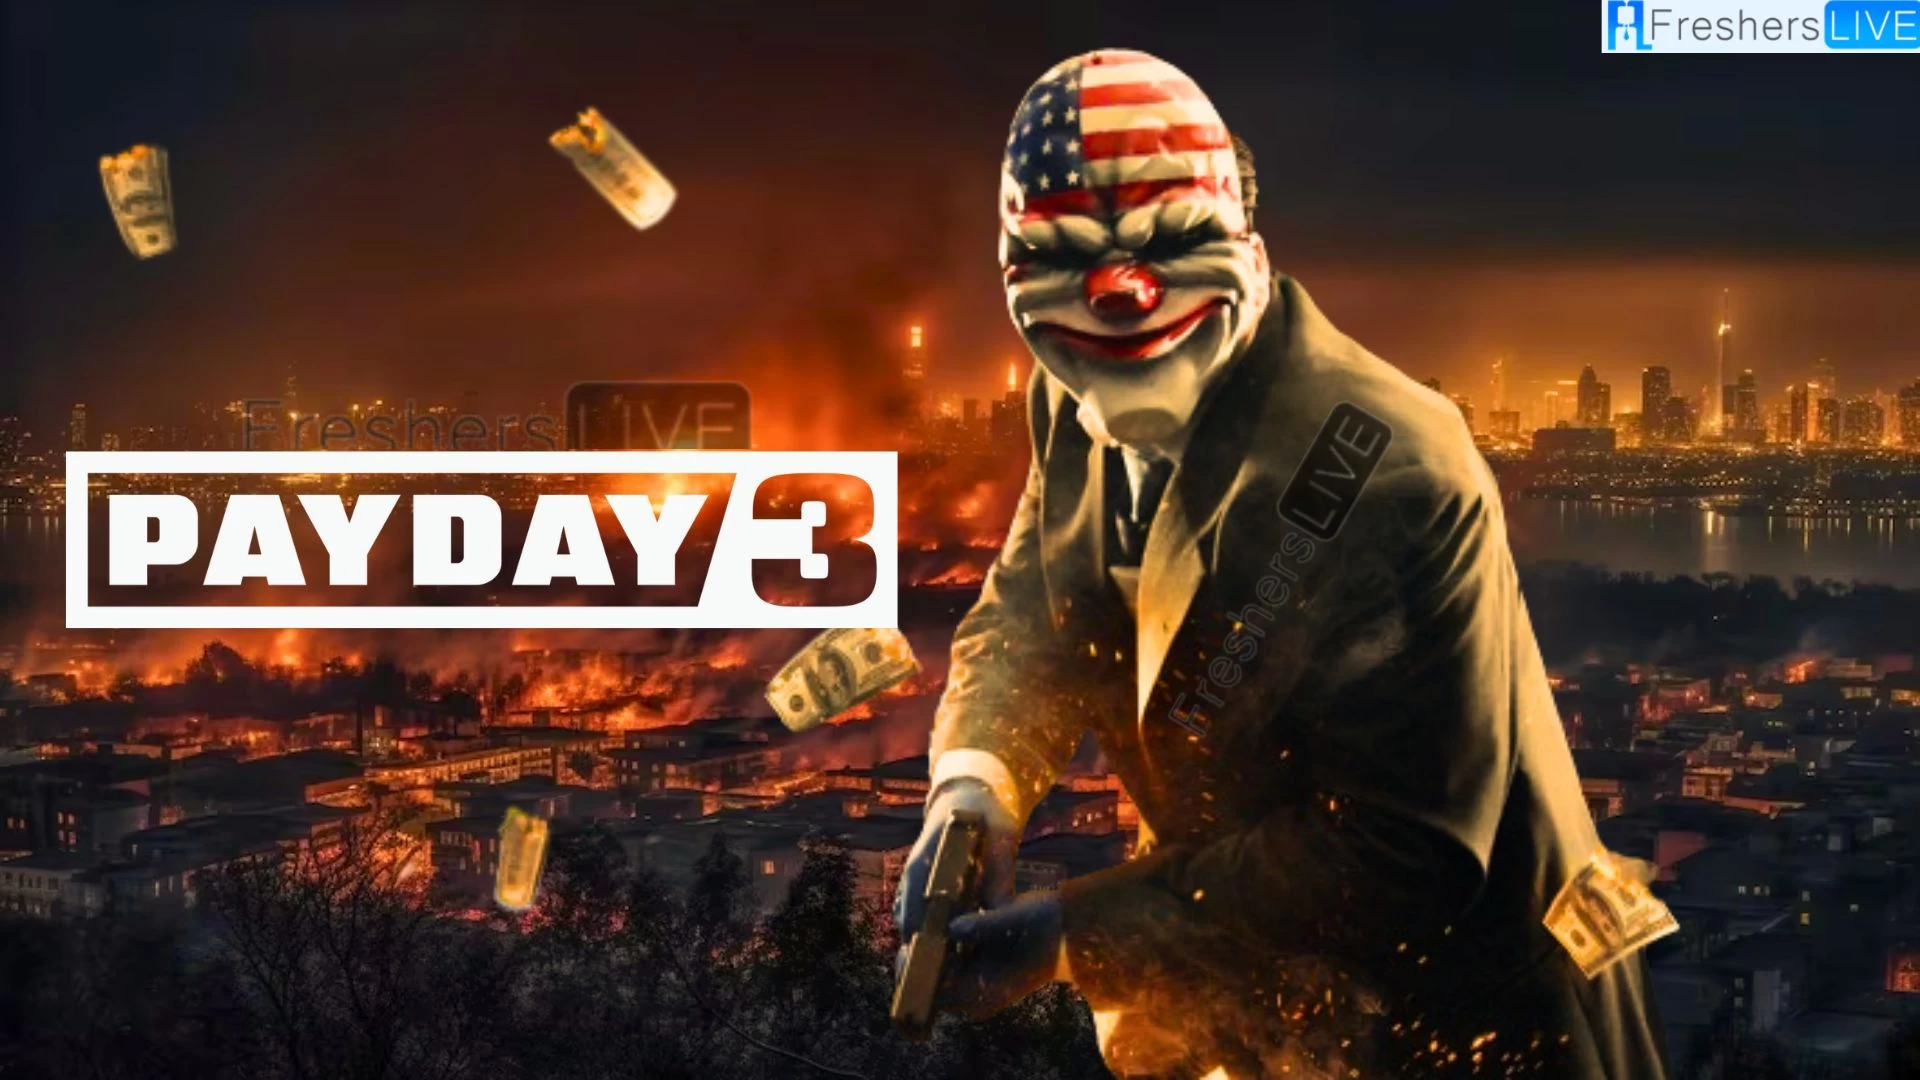 Payday 3 System Requirements, What are the Minimum and Recommended Specifications?